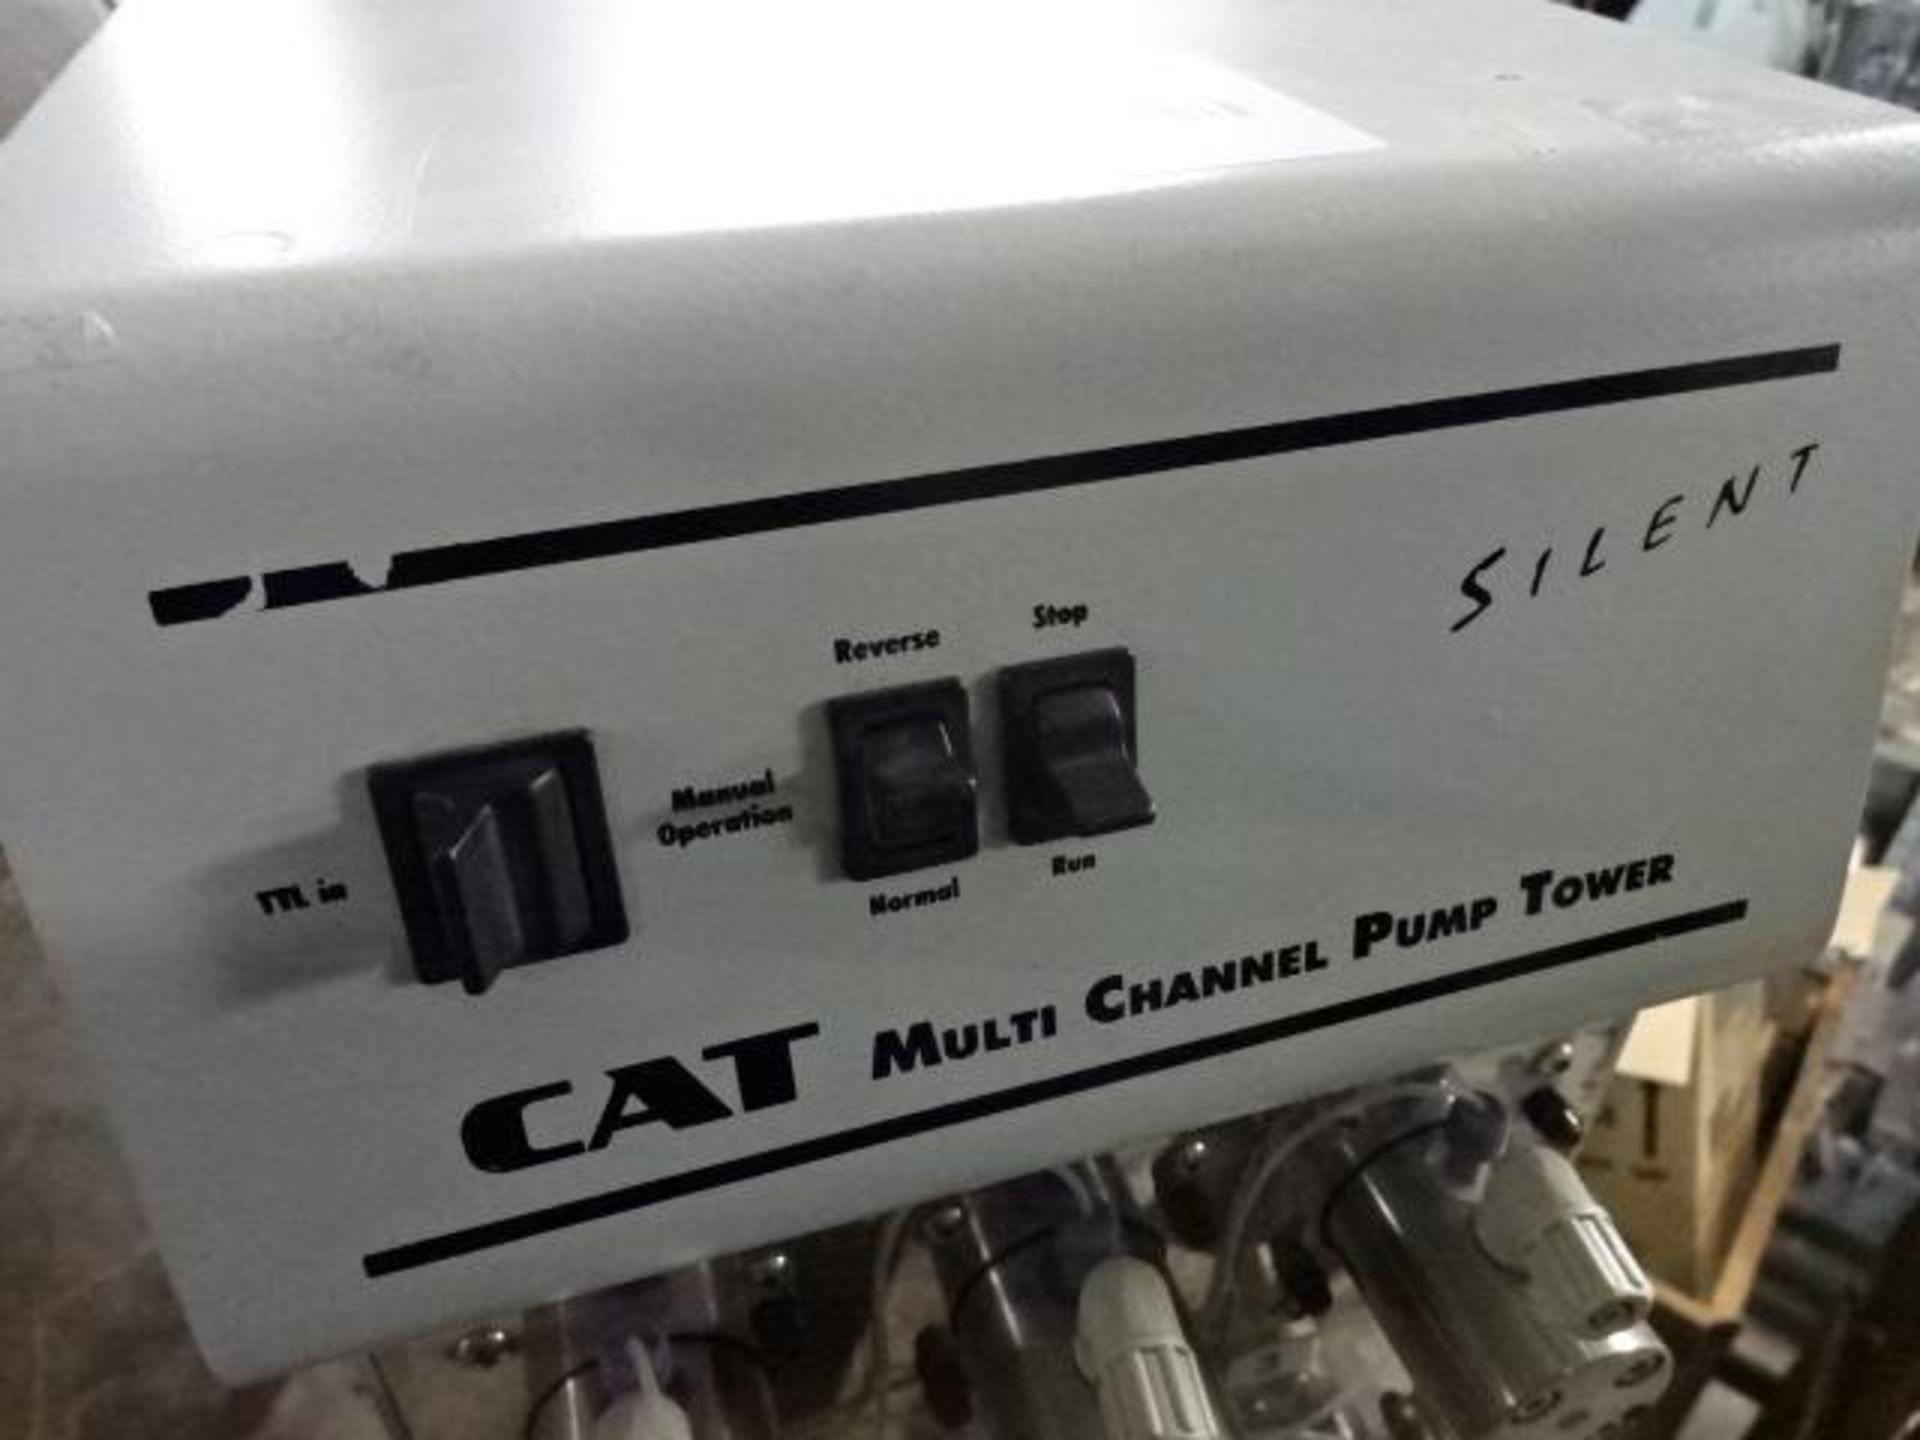 Cat silent multi-channel pump tower - Image 3 of 4